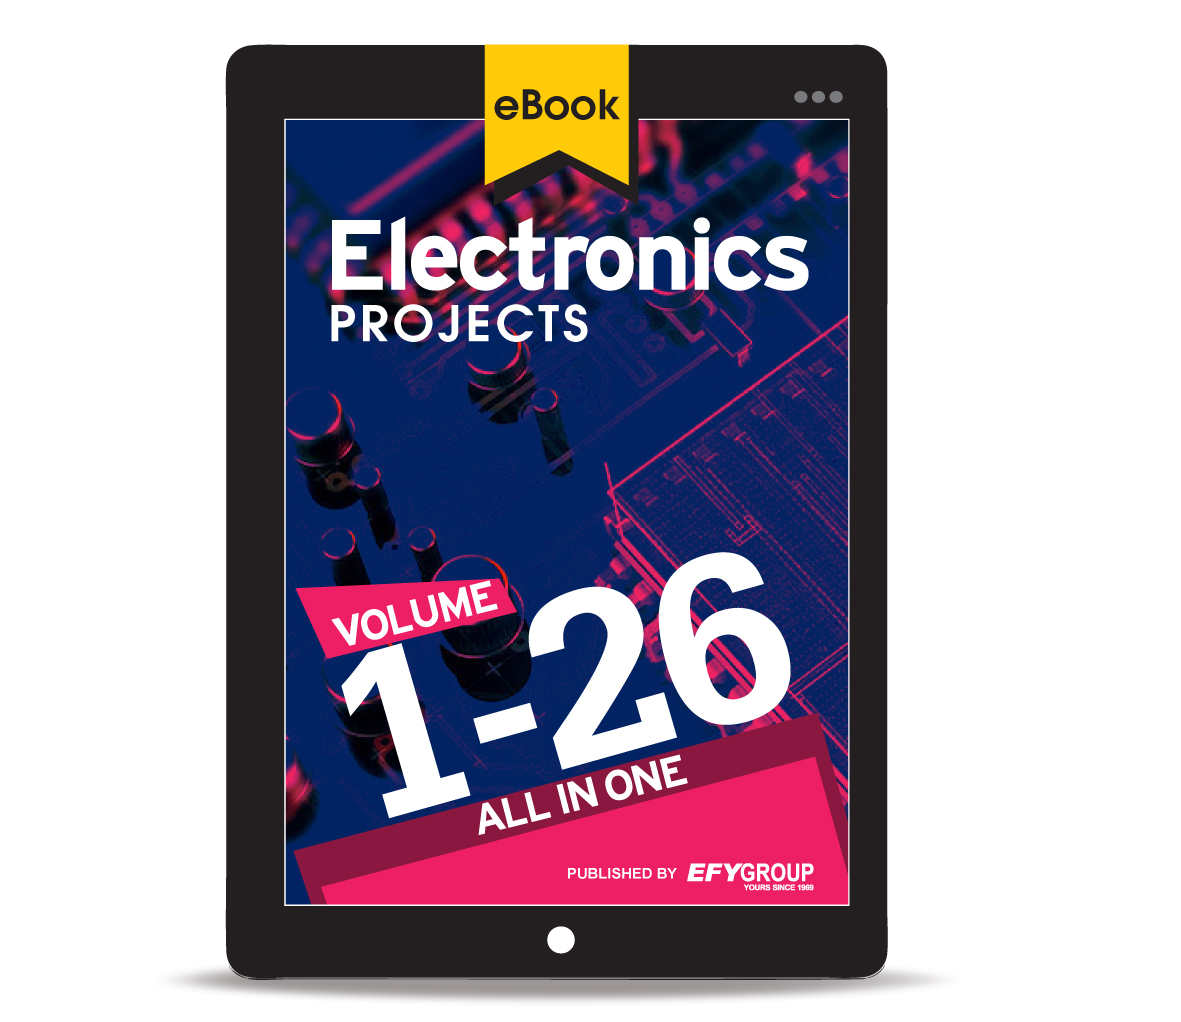 ELECTRONICS PROJECTS VOLUME All IN ONE